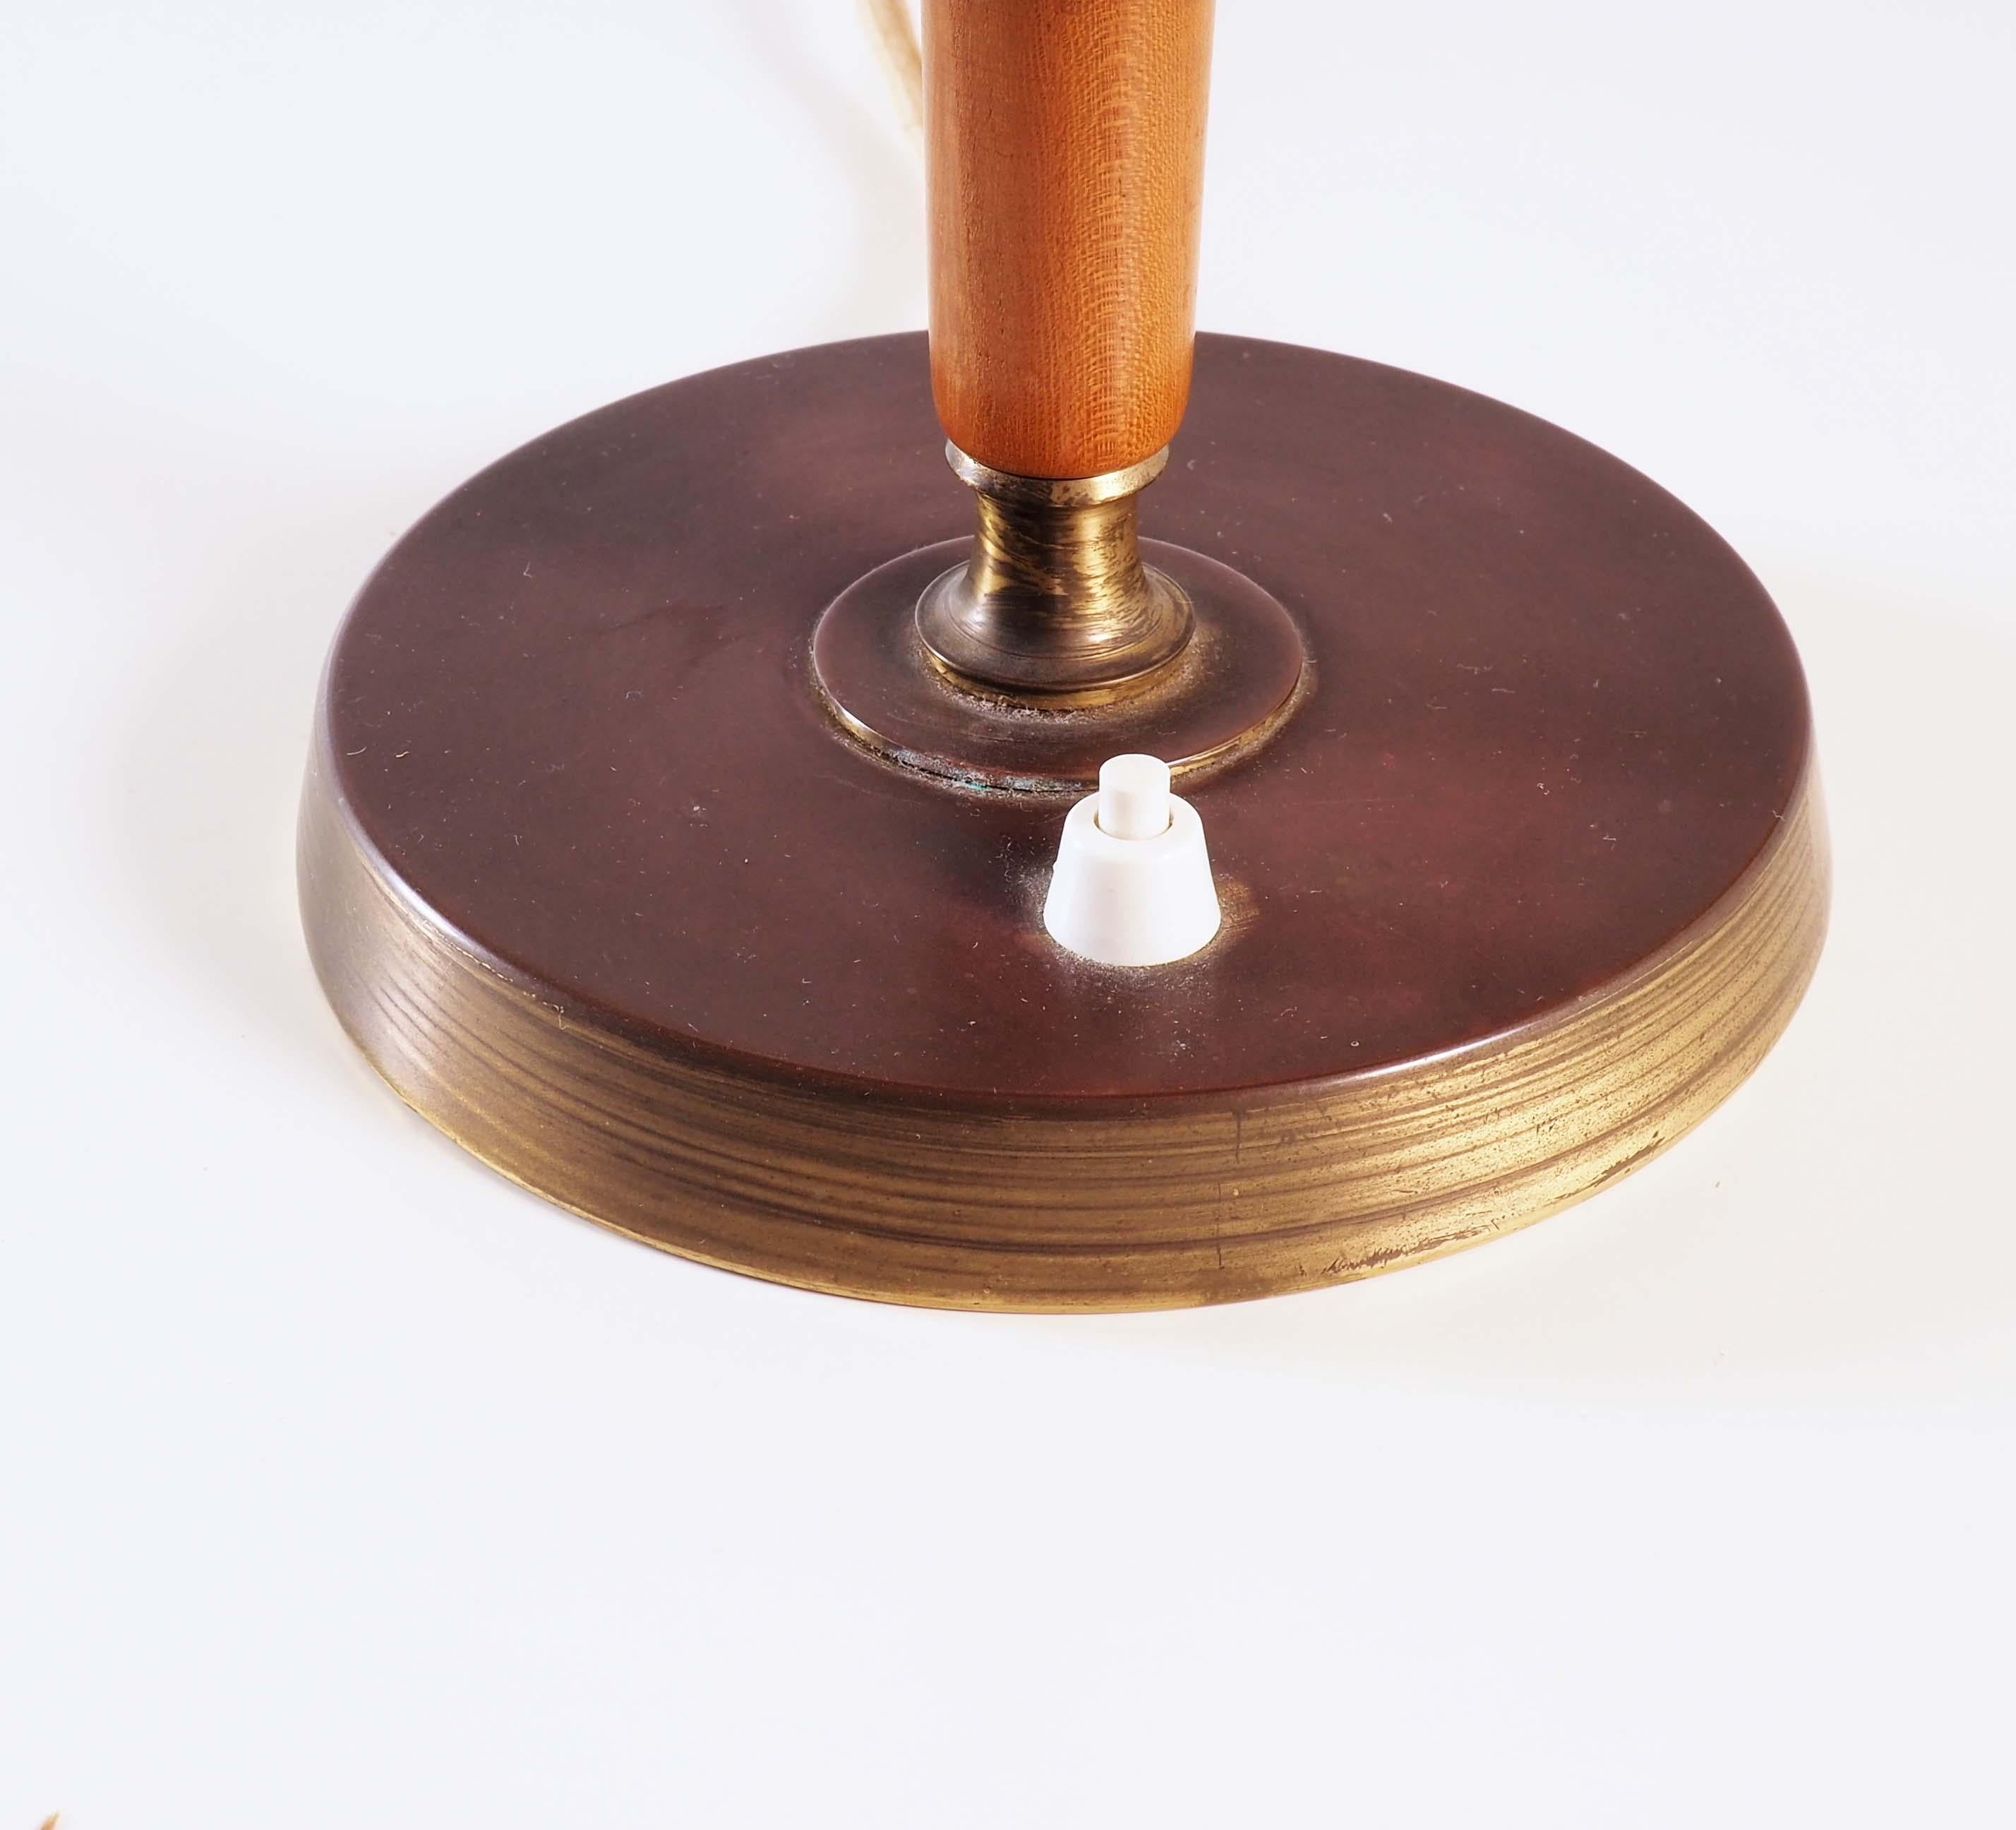 Table lamp made during the 1940s for Stockholms leading warehouse Nordiska Kompaniet at their own factory in Nyköping. The lamp base is in brass and elm. The inner-shade is in glass and the outer shade is in painted metal.